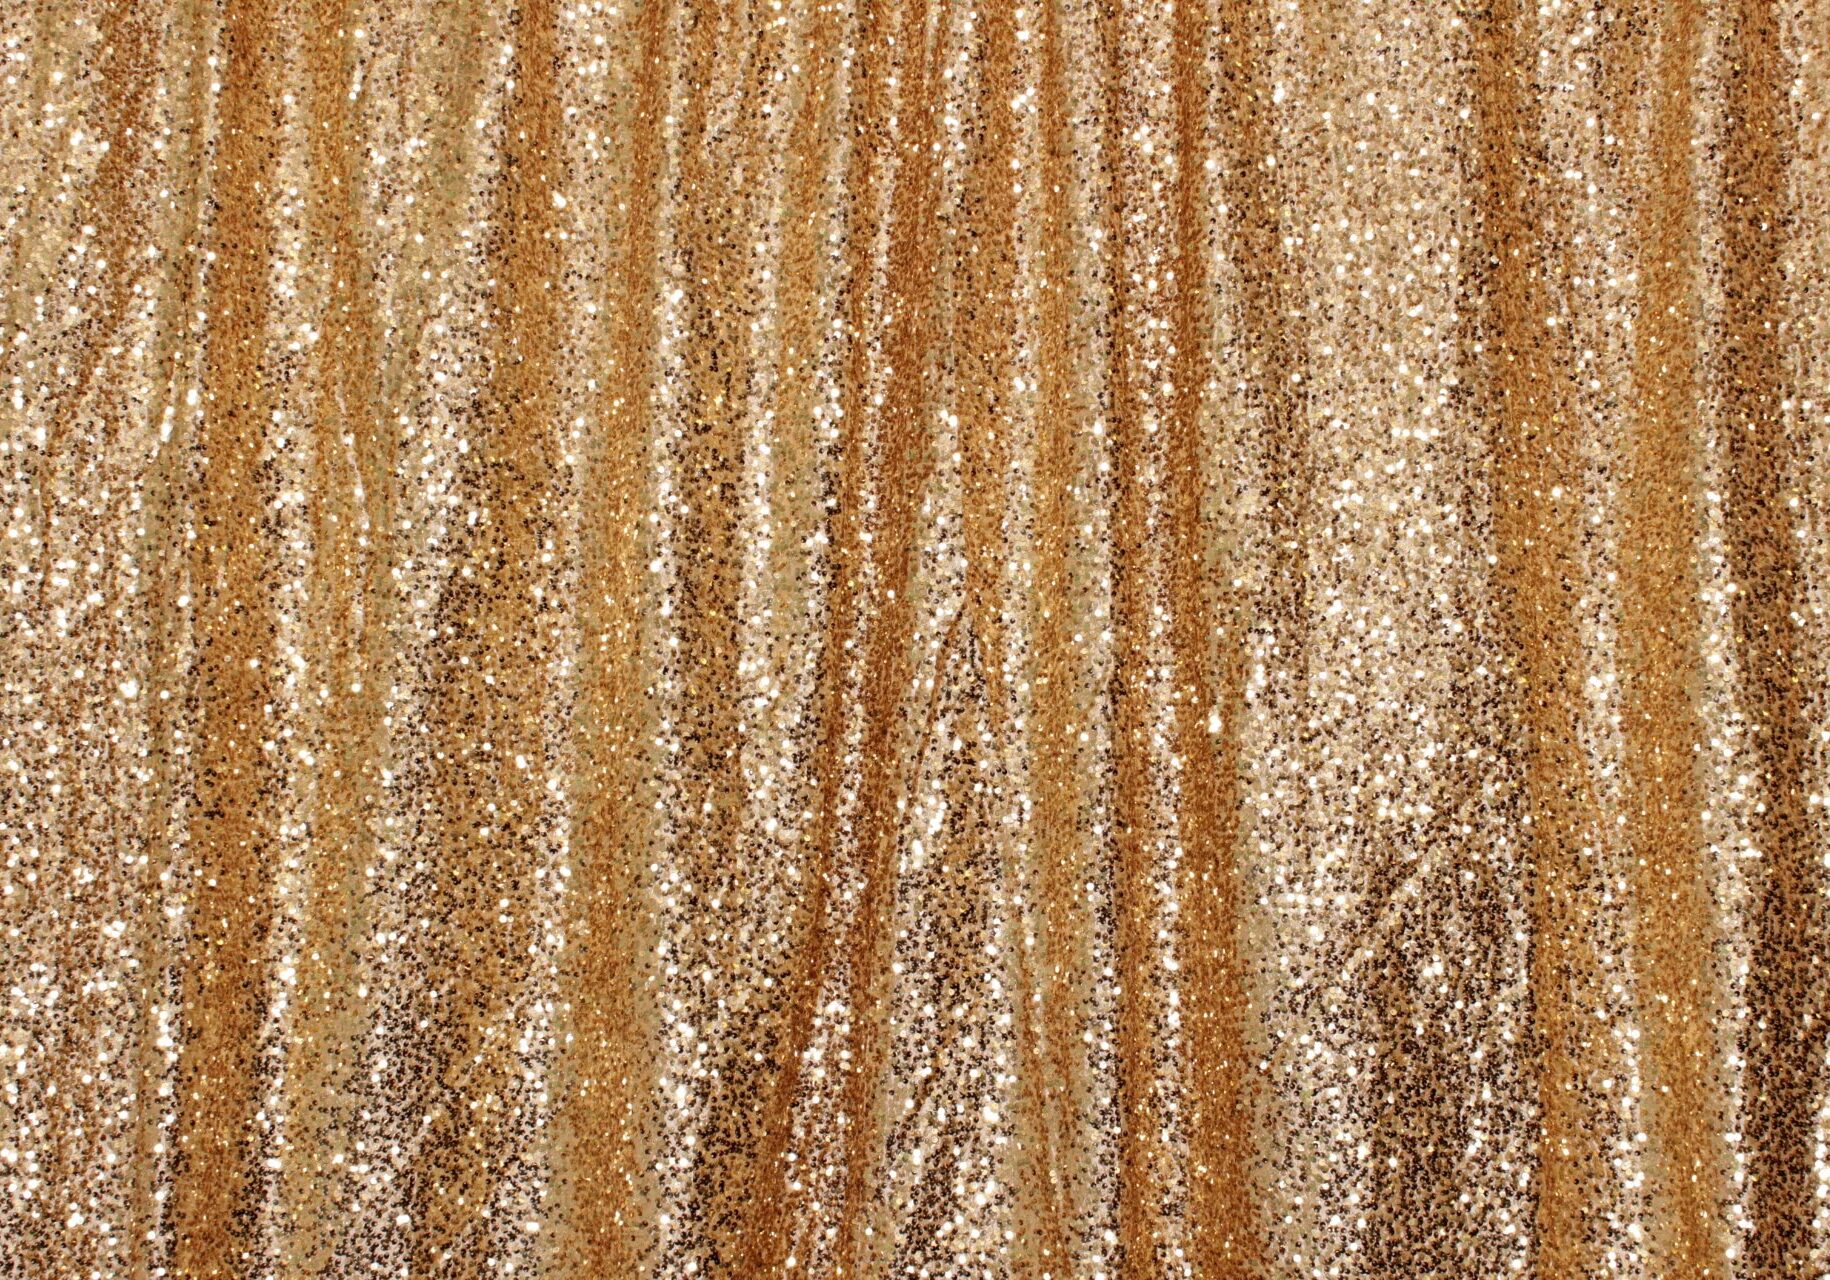 Fizzy_Cat_Photo_Booth_backdrop_Gold_Sequin